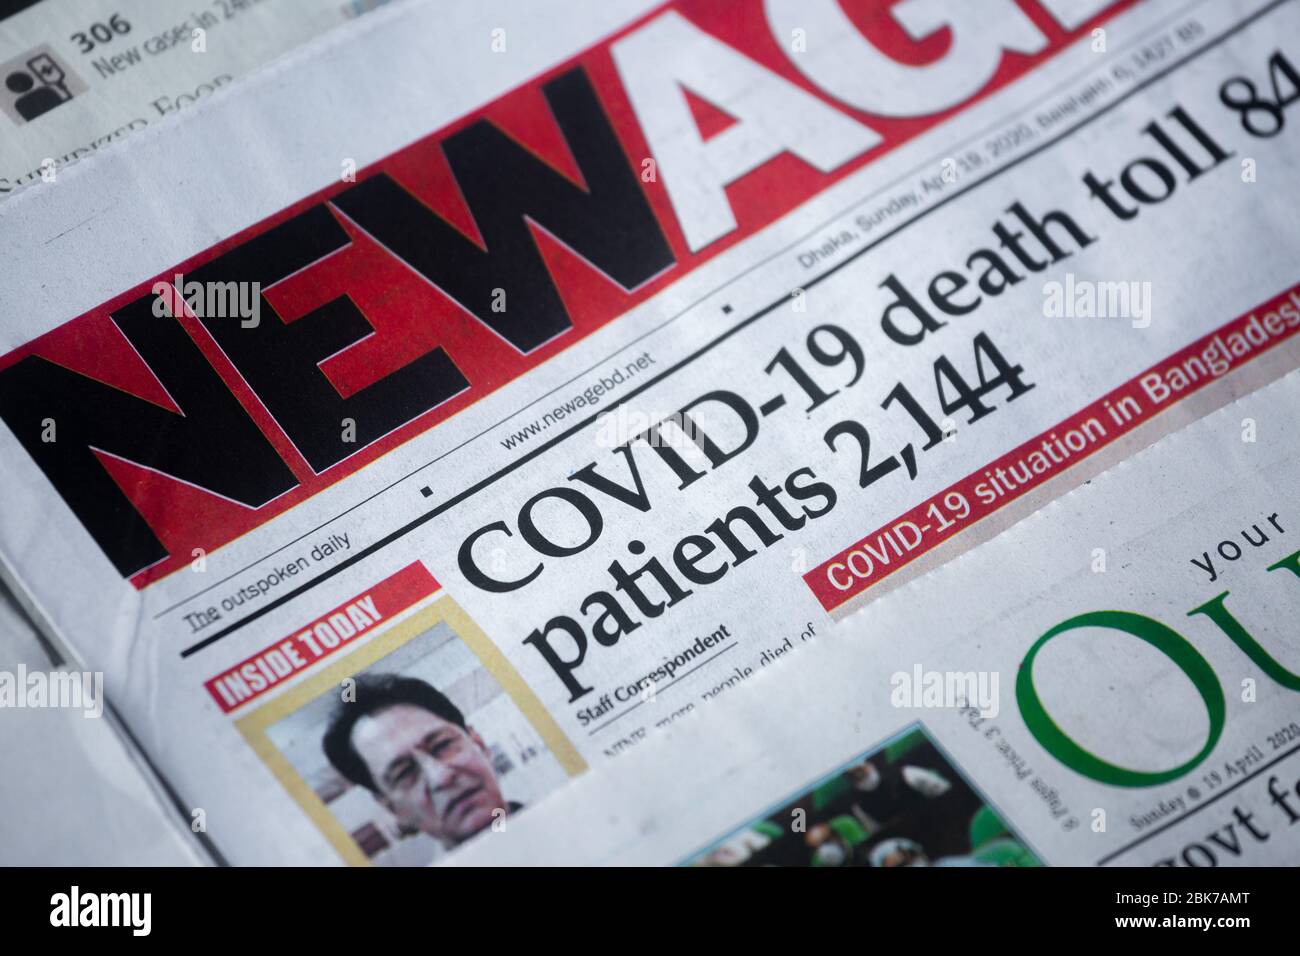 Today S Headline Of A Popular English Newspaper In Bangladesh Is Covid 19 Death Toll 84 Patients 2144 Stock Photo Alamy